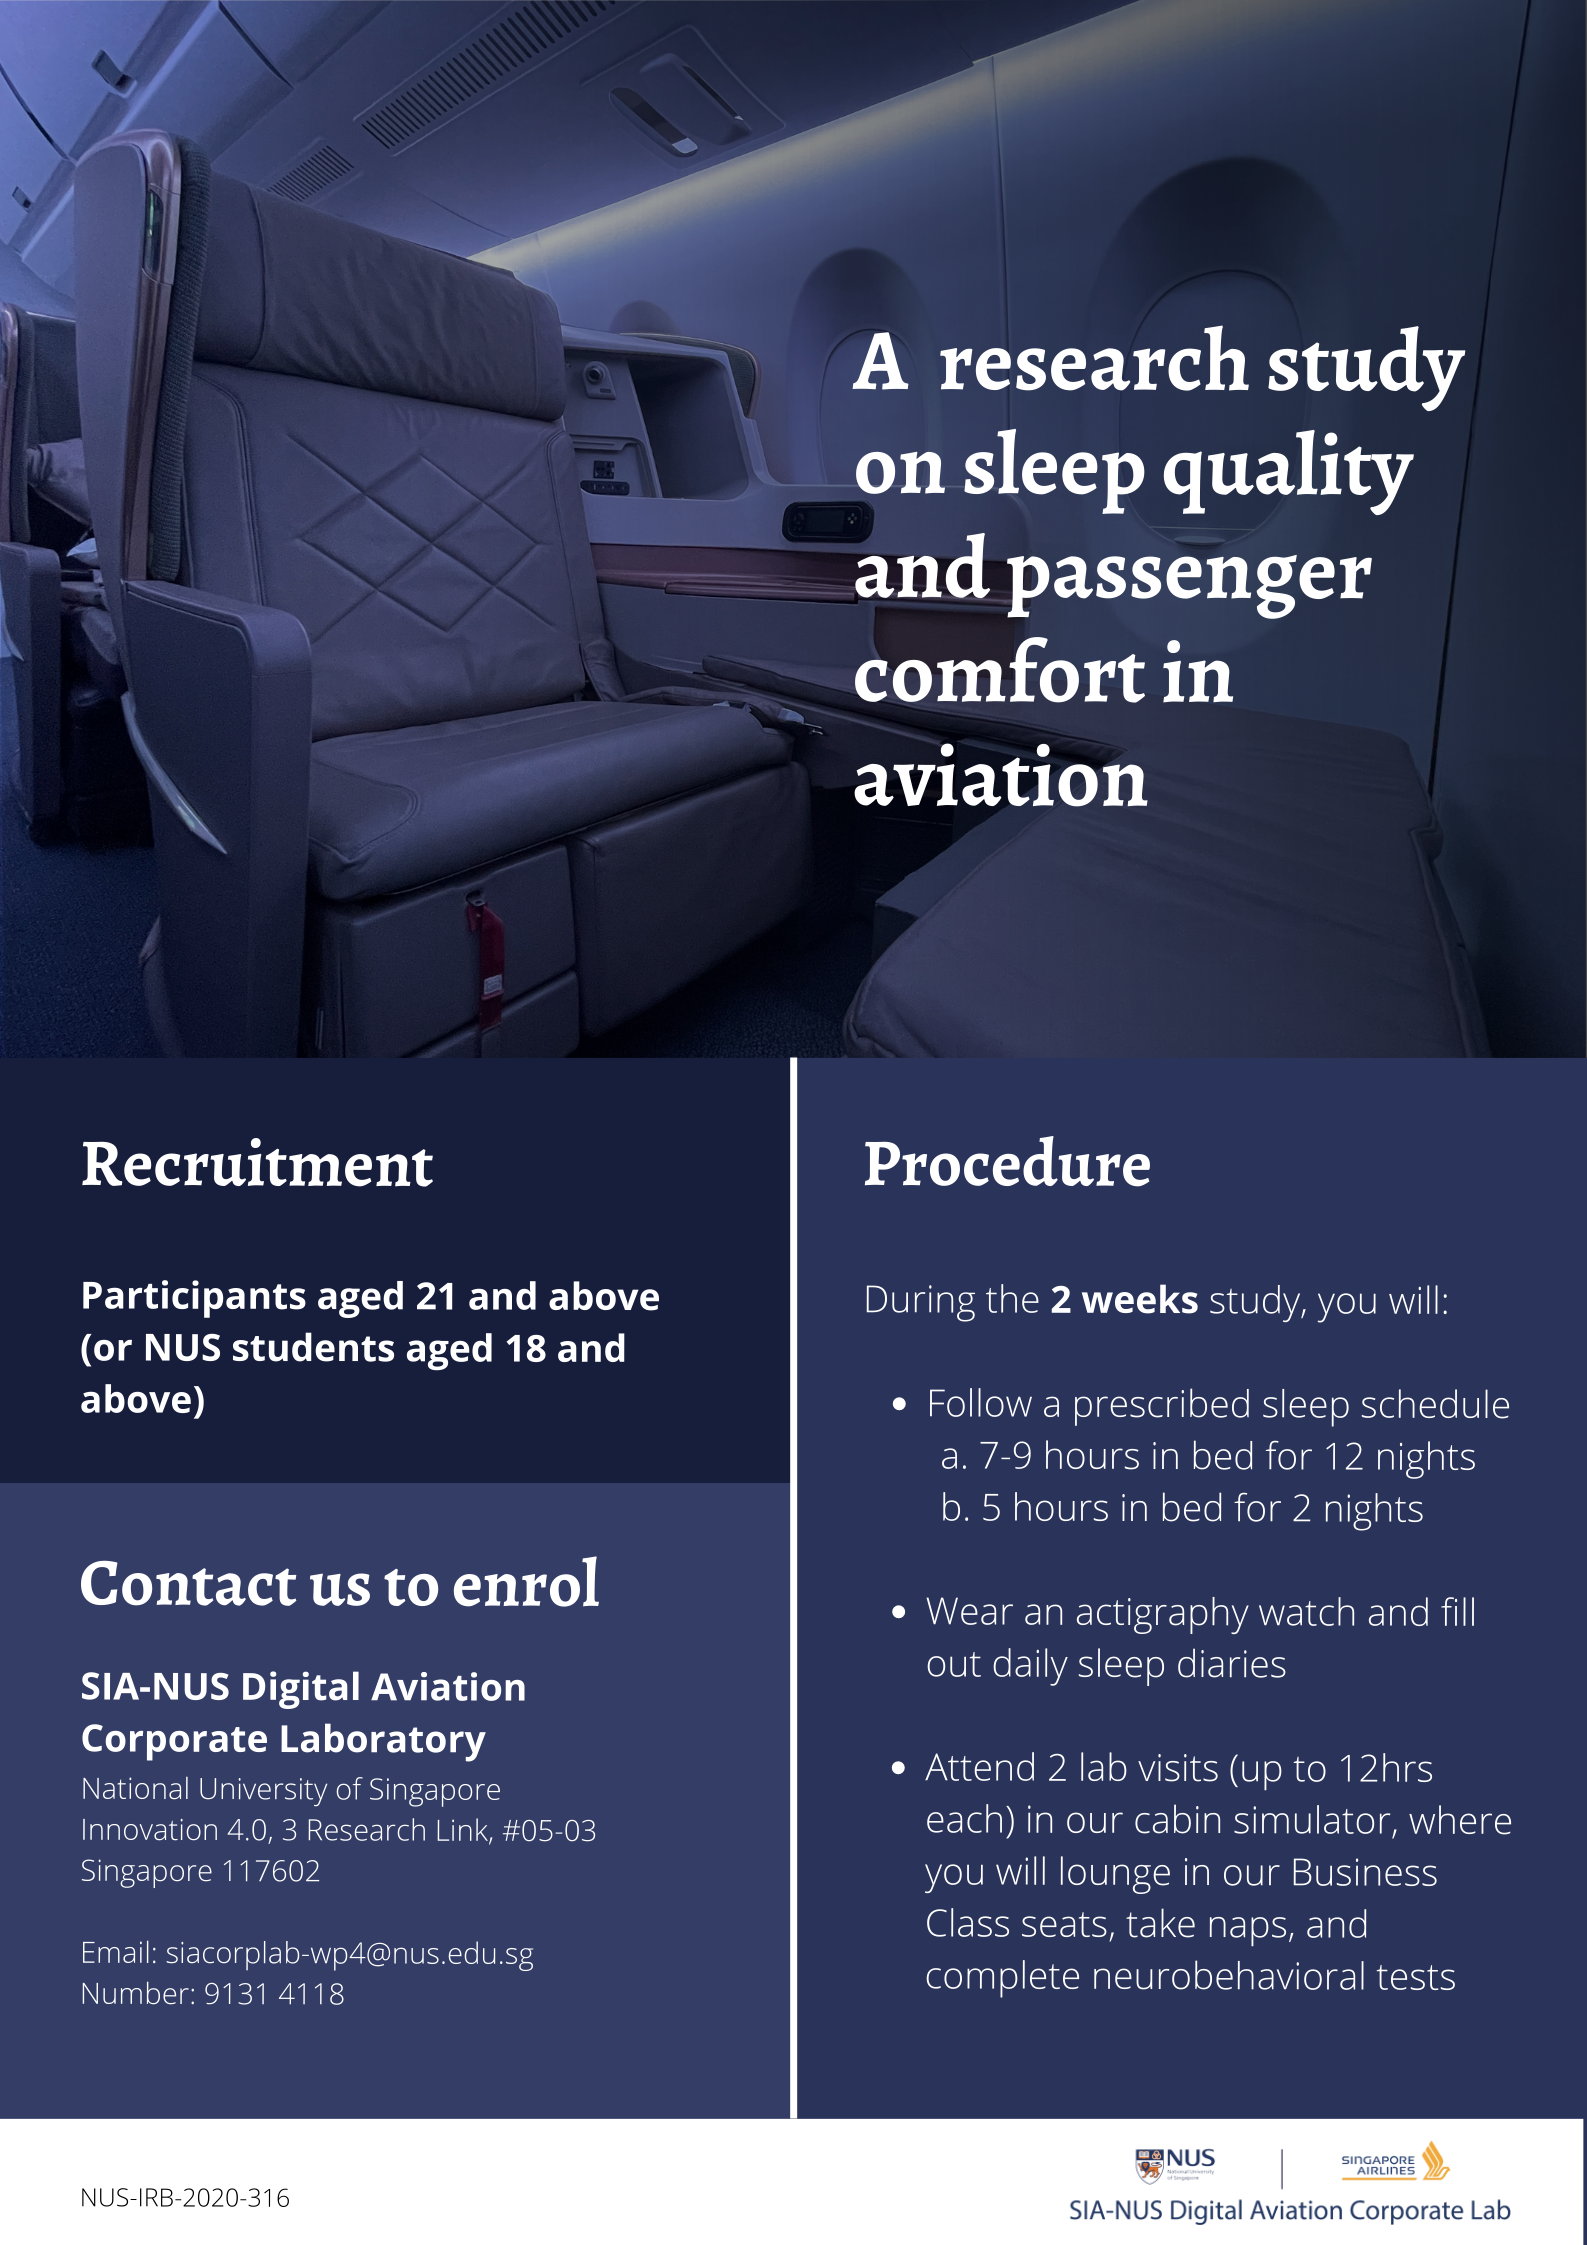 [CLOSED] Developing Evidence-Based Interventions to Improve Sleep Quality and Passenger Comfort in Aviation